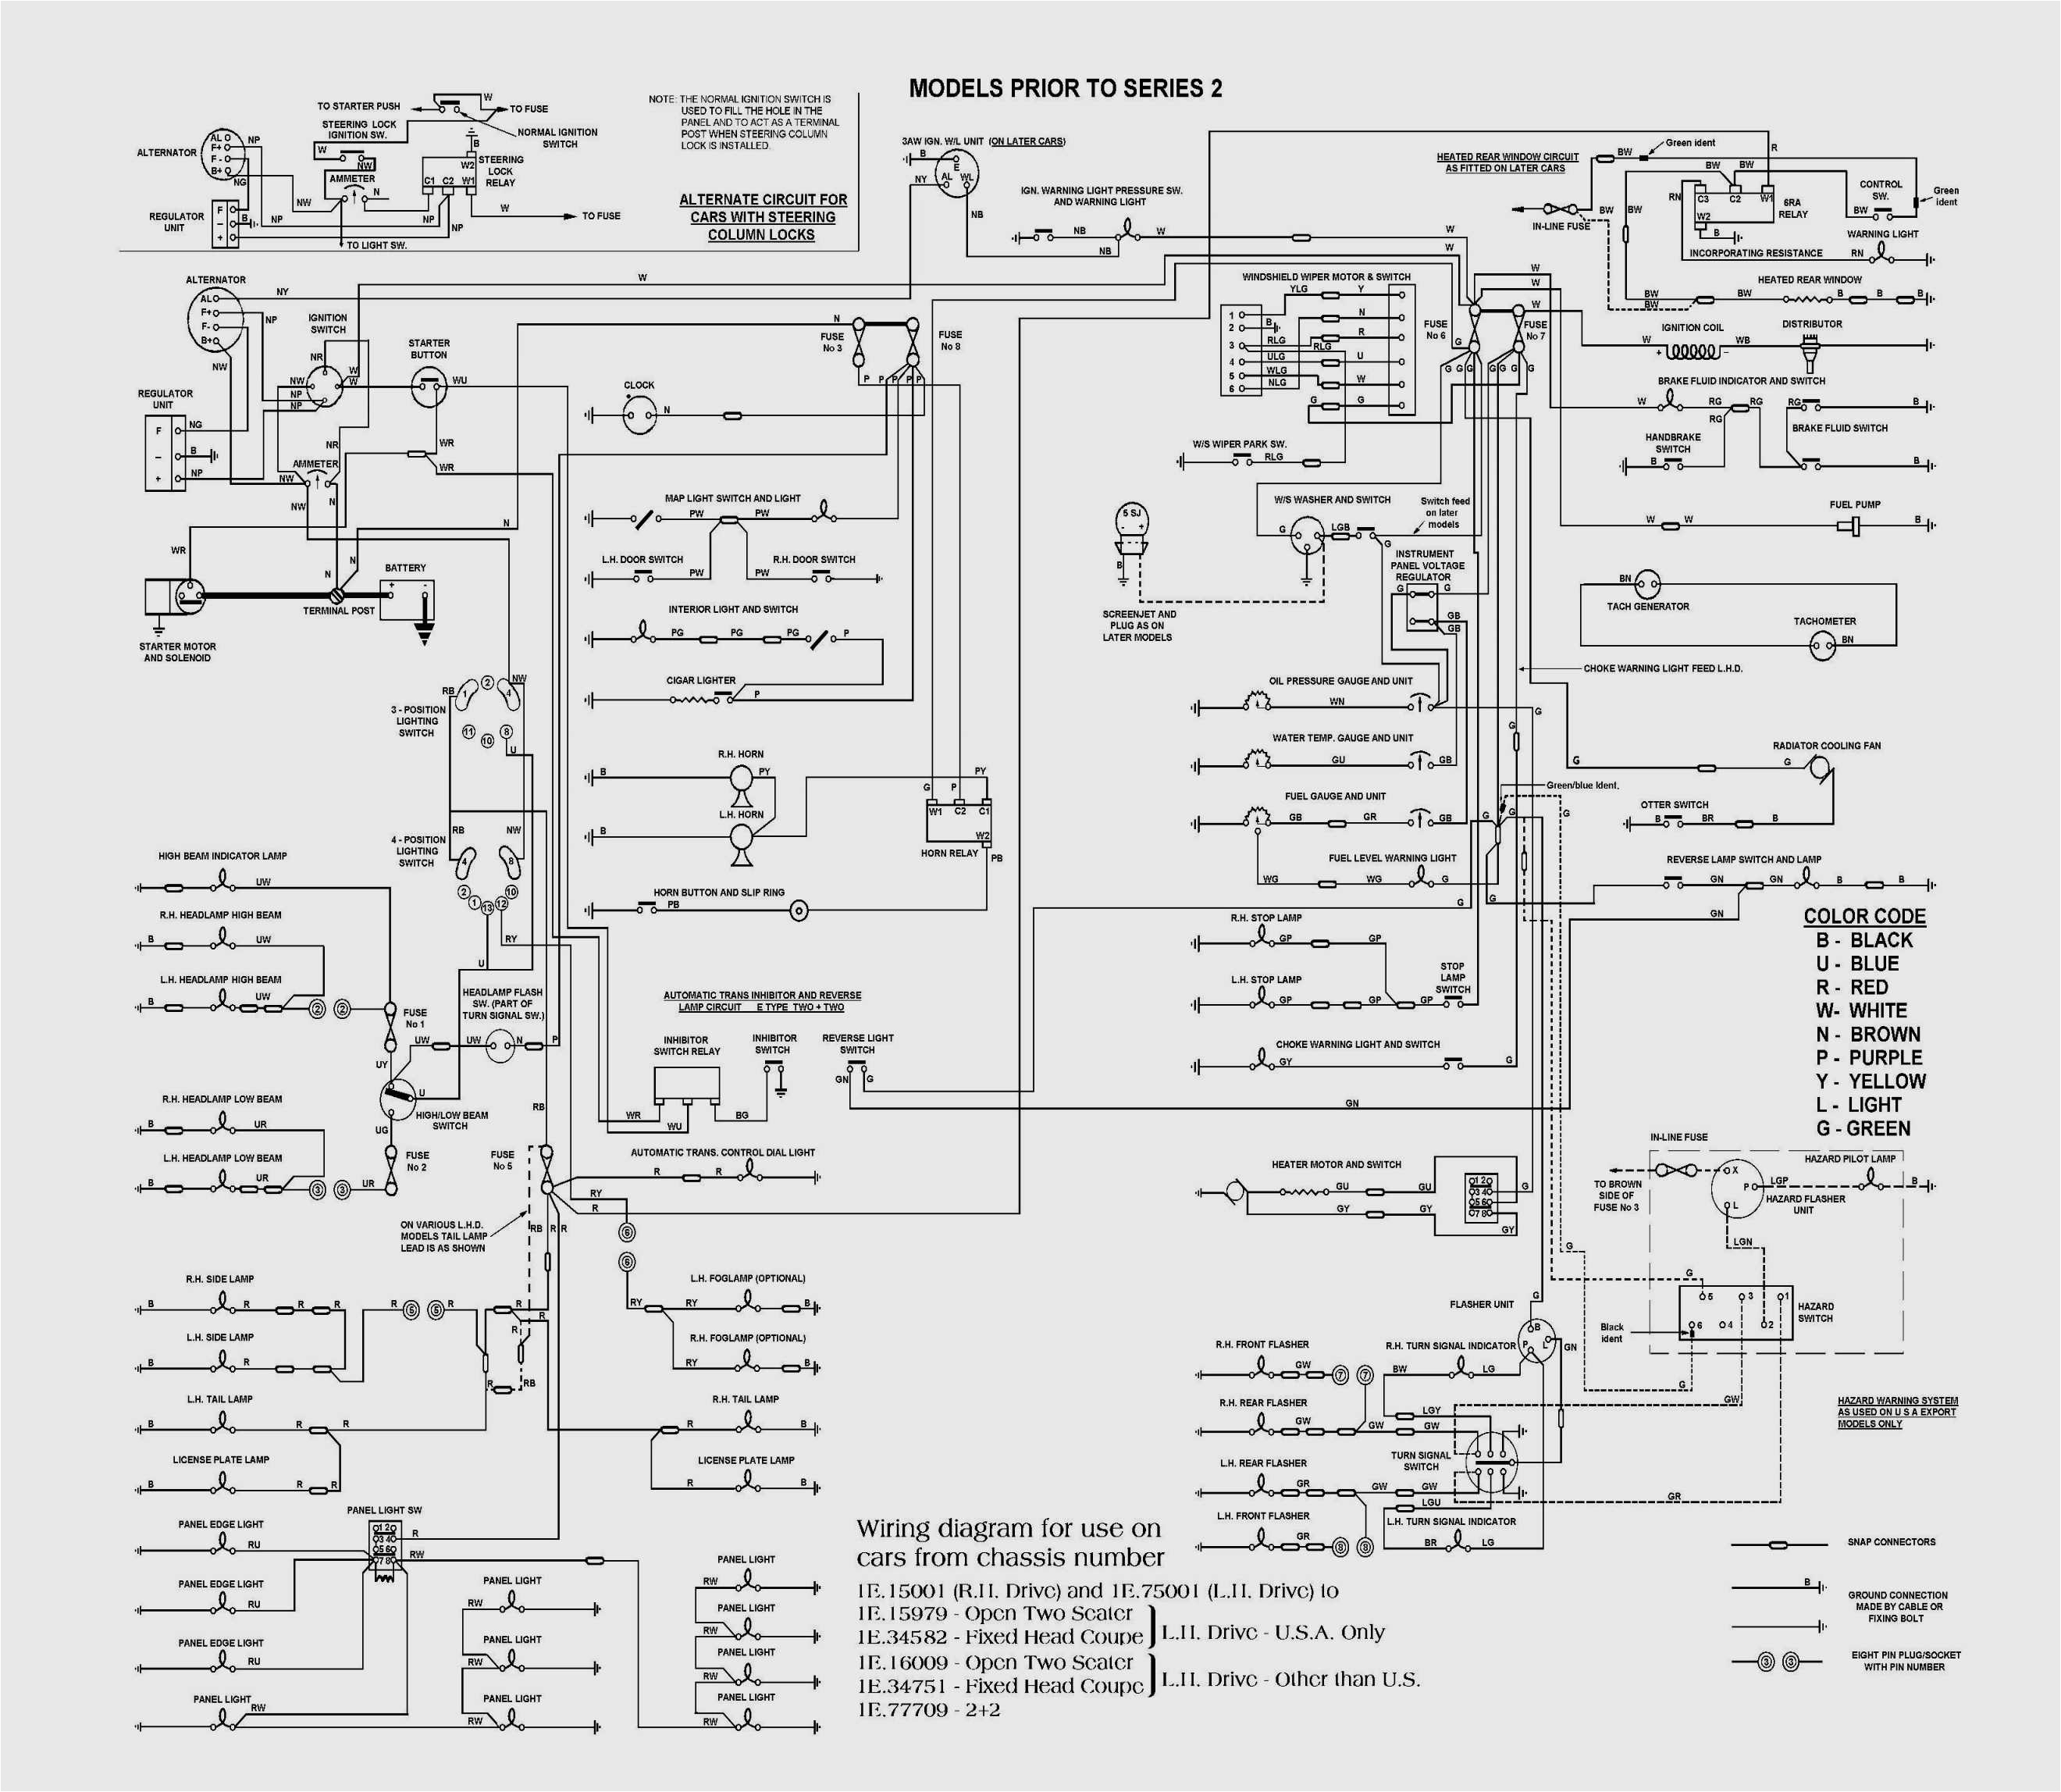 vdo gauges wiring diagrams wiring diagramsautometer voltmeter wiring diagram fresh wiring diagrams for vdo rh callingallquestions